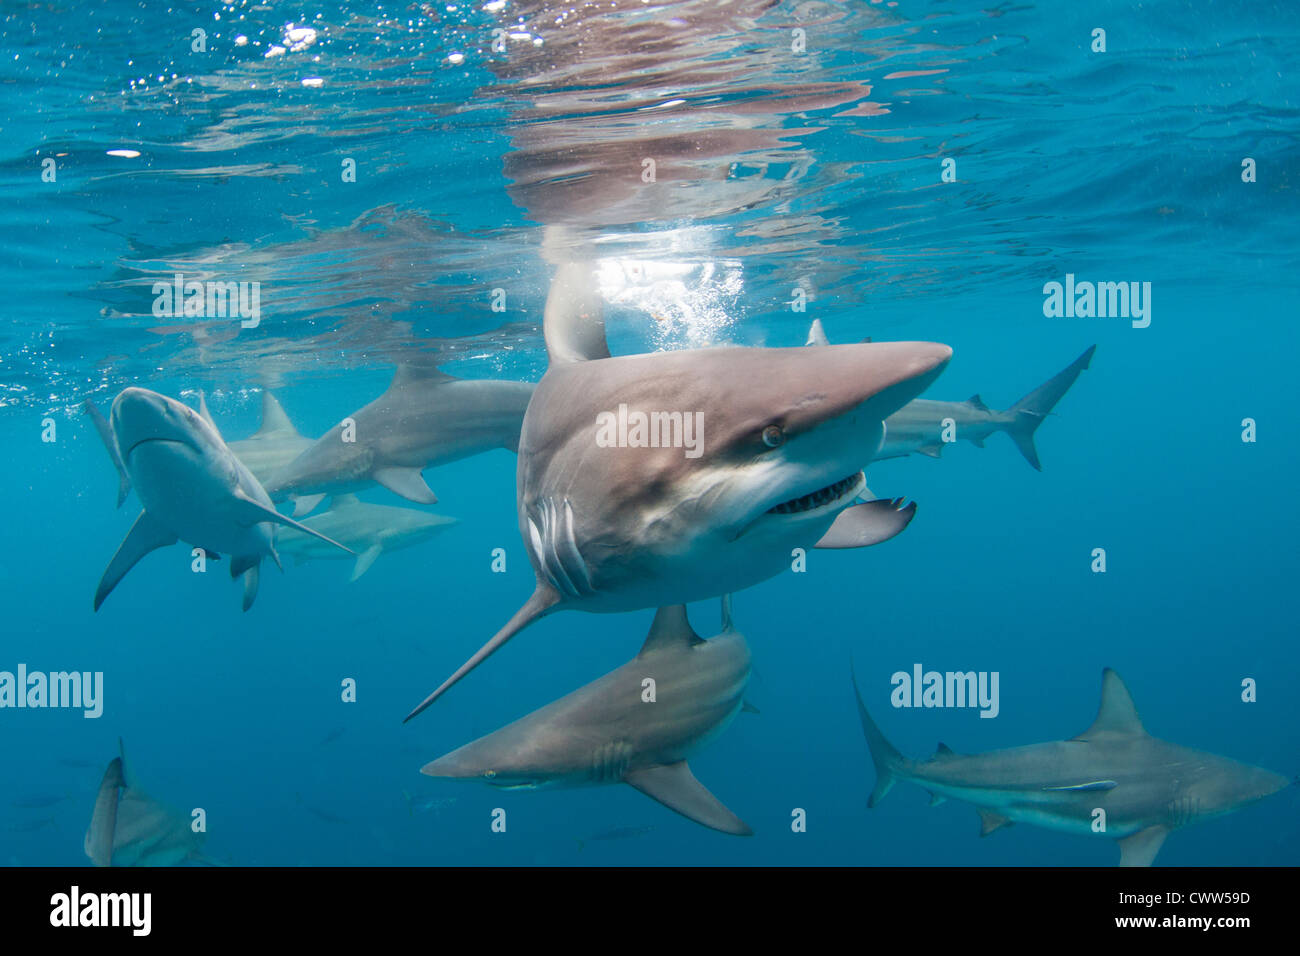 Black Tip Sharks in Aliwal Shoal, South Africa Stock Photo